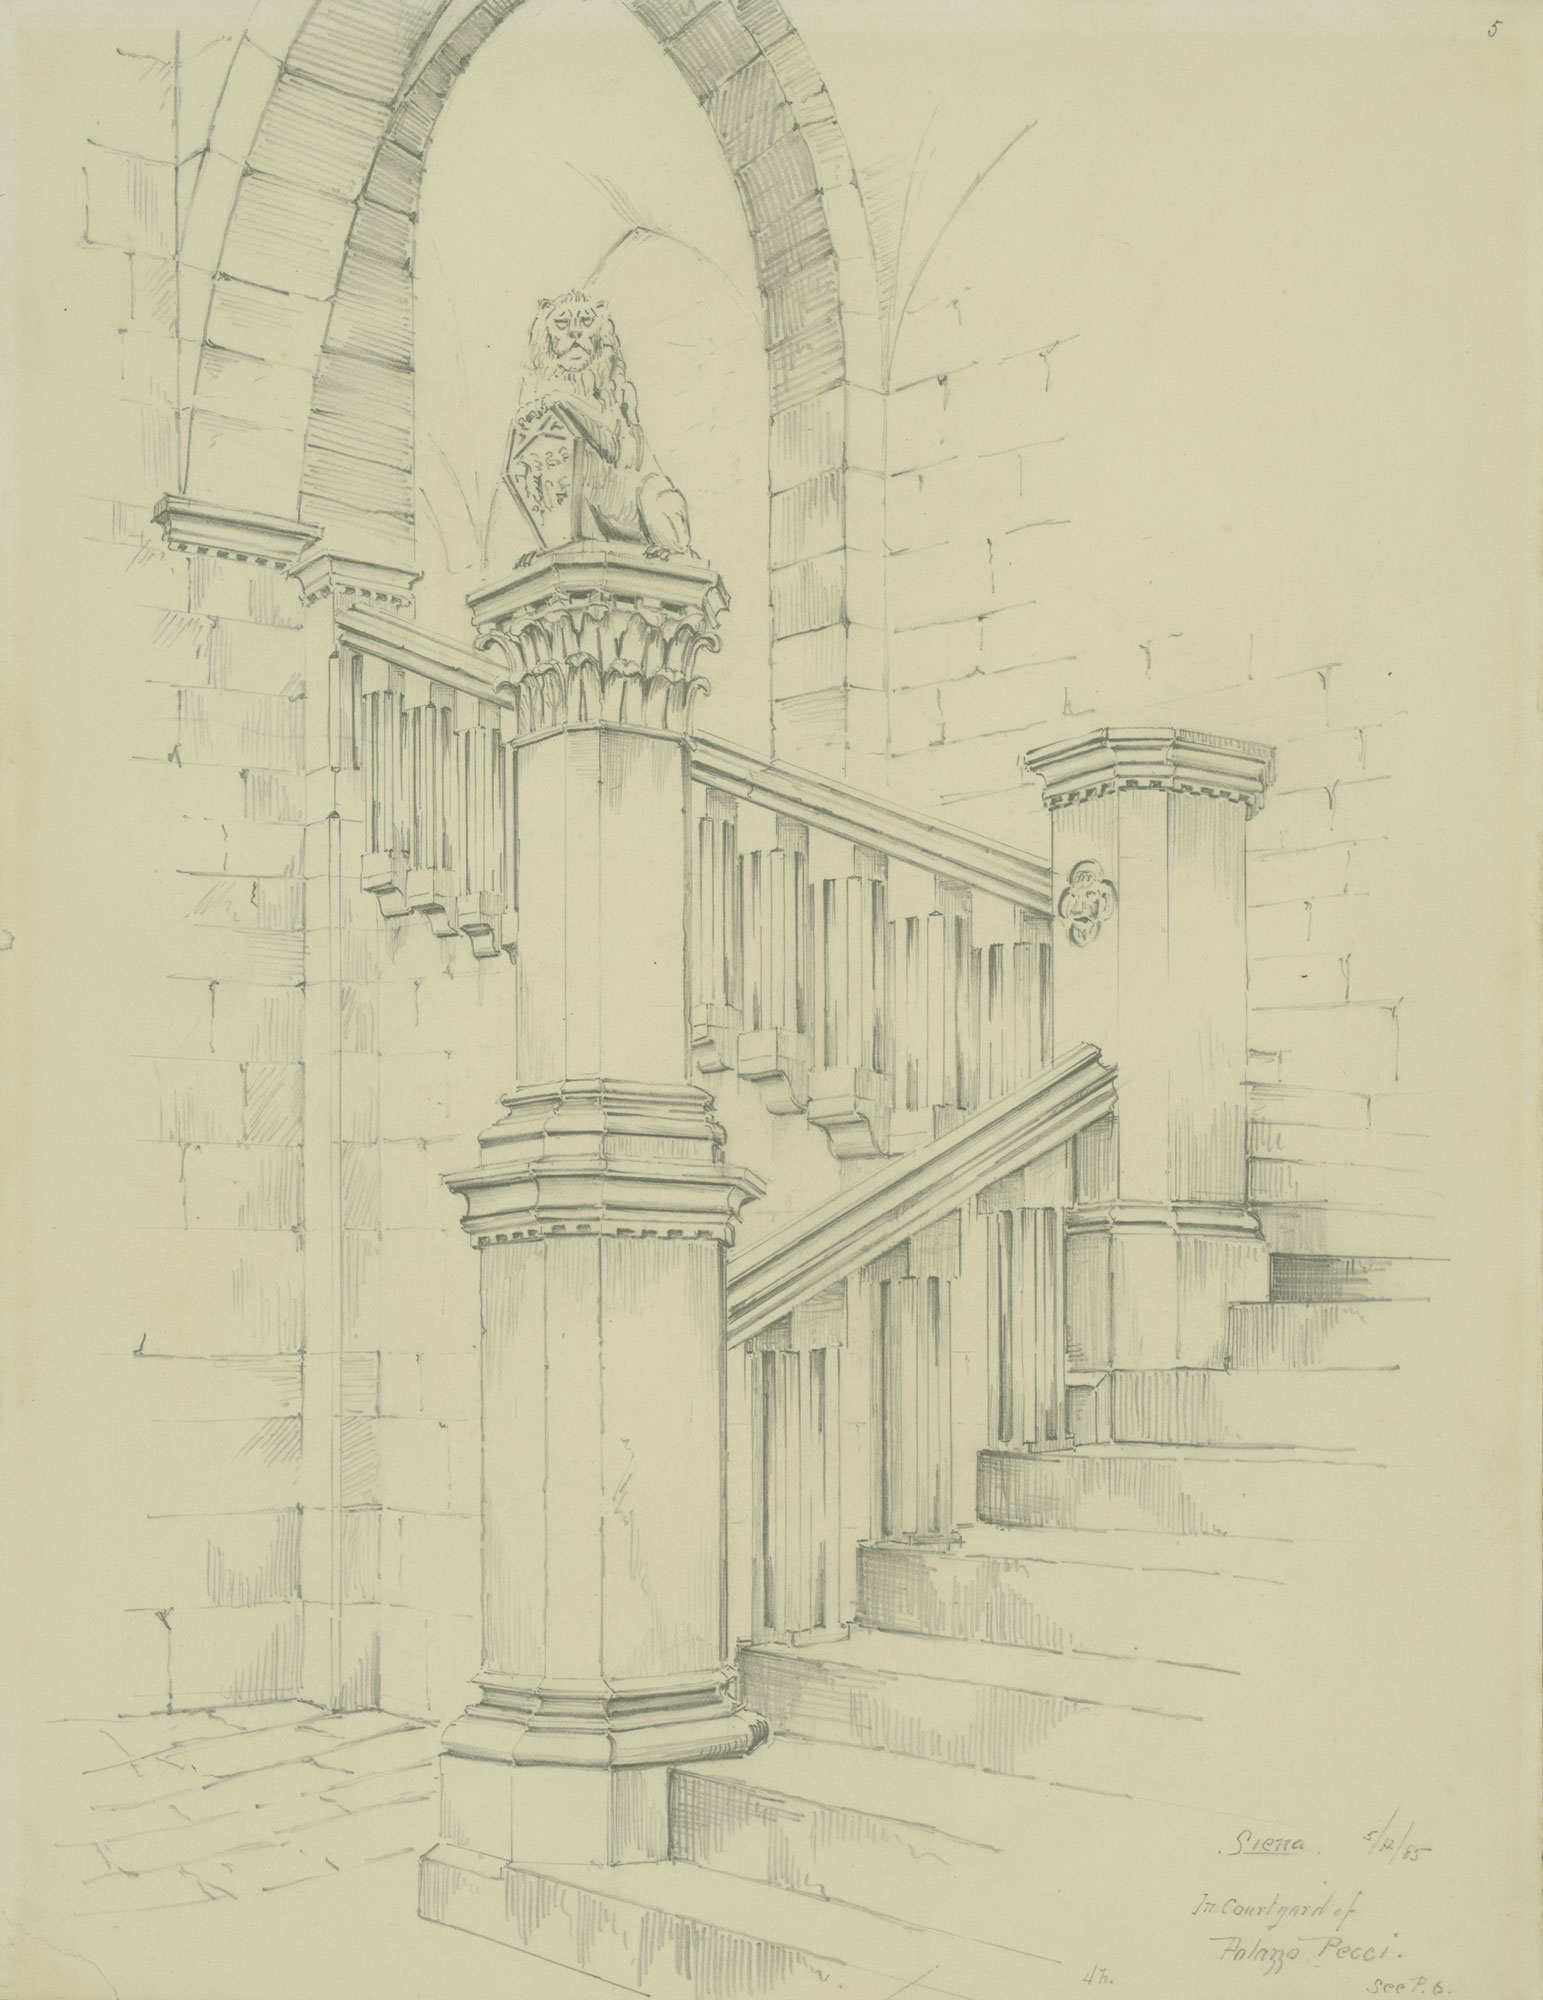 Sketch of interior stairwell by Frank miles Day